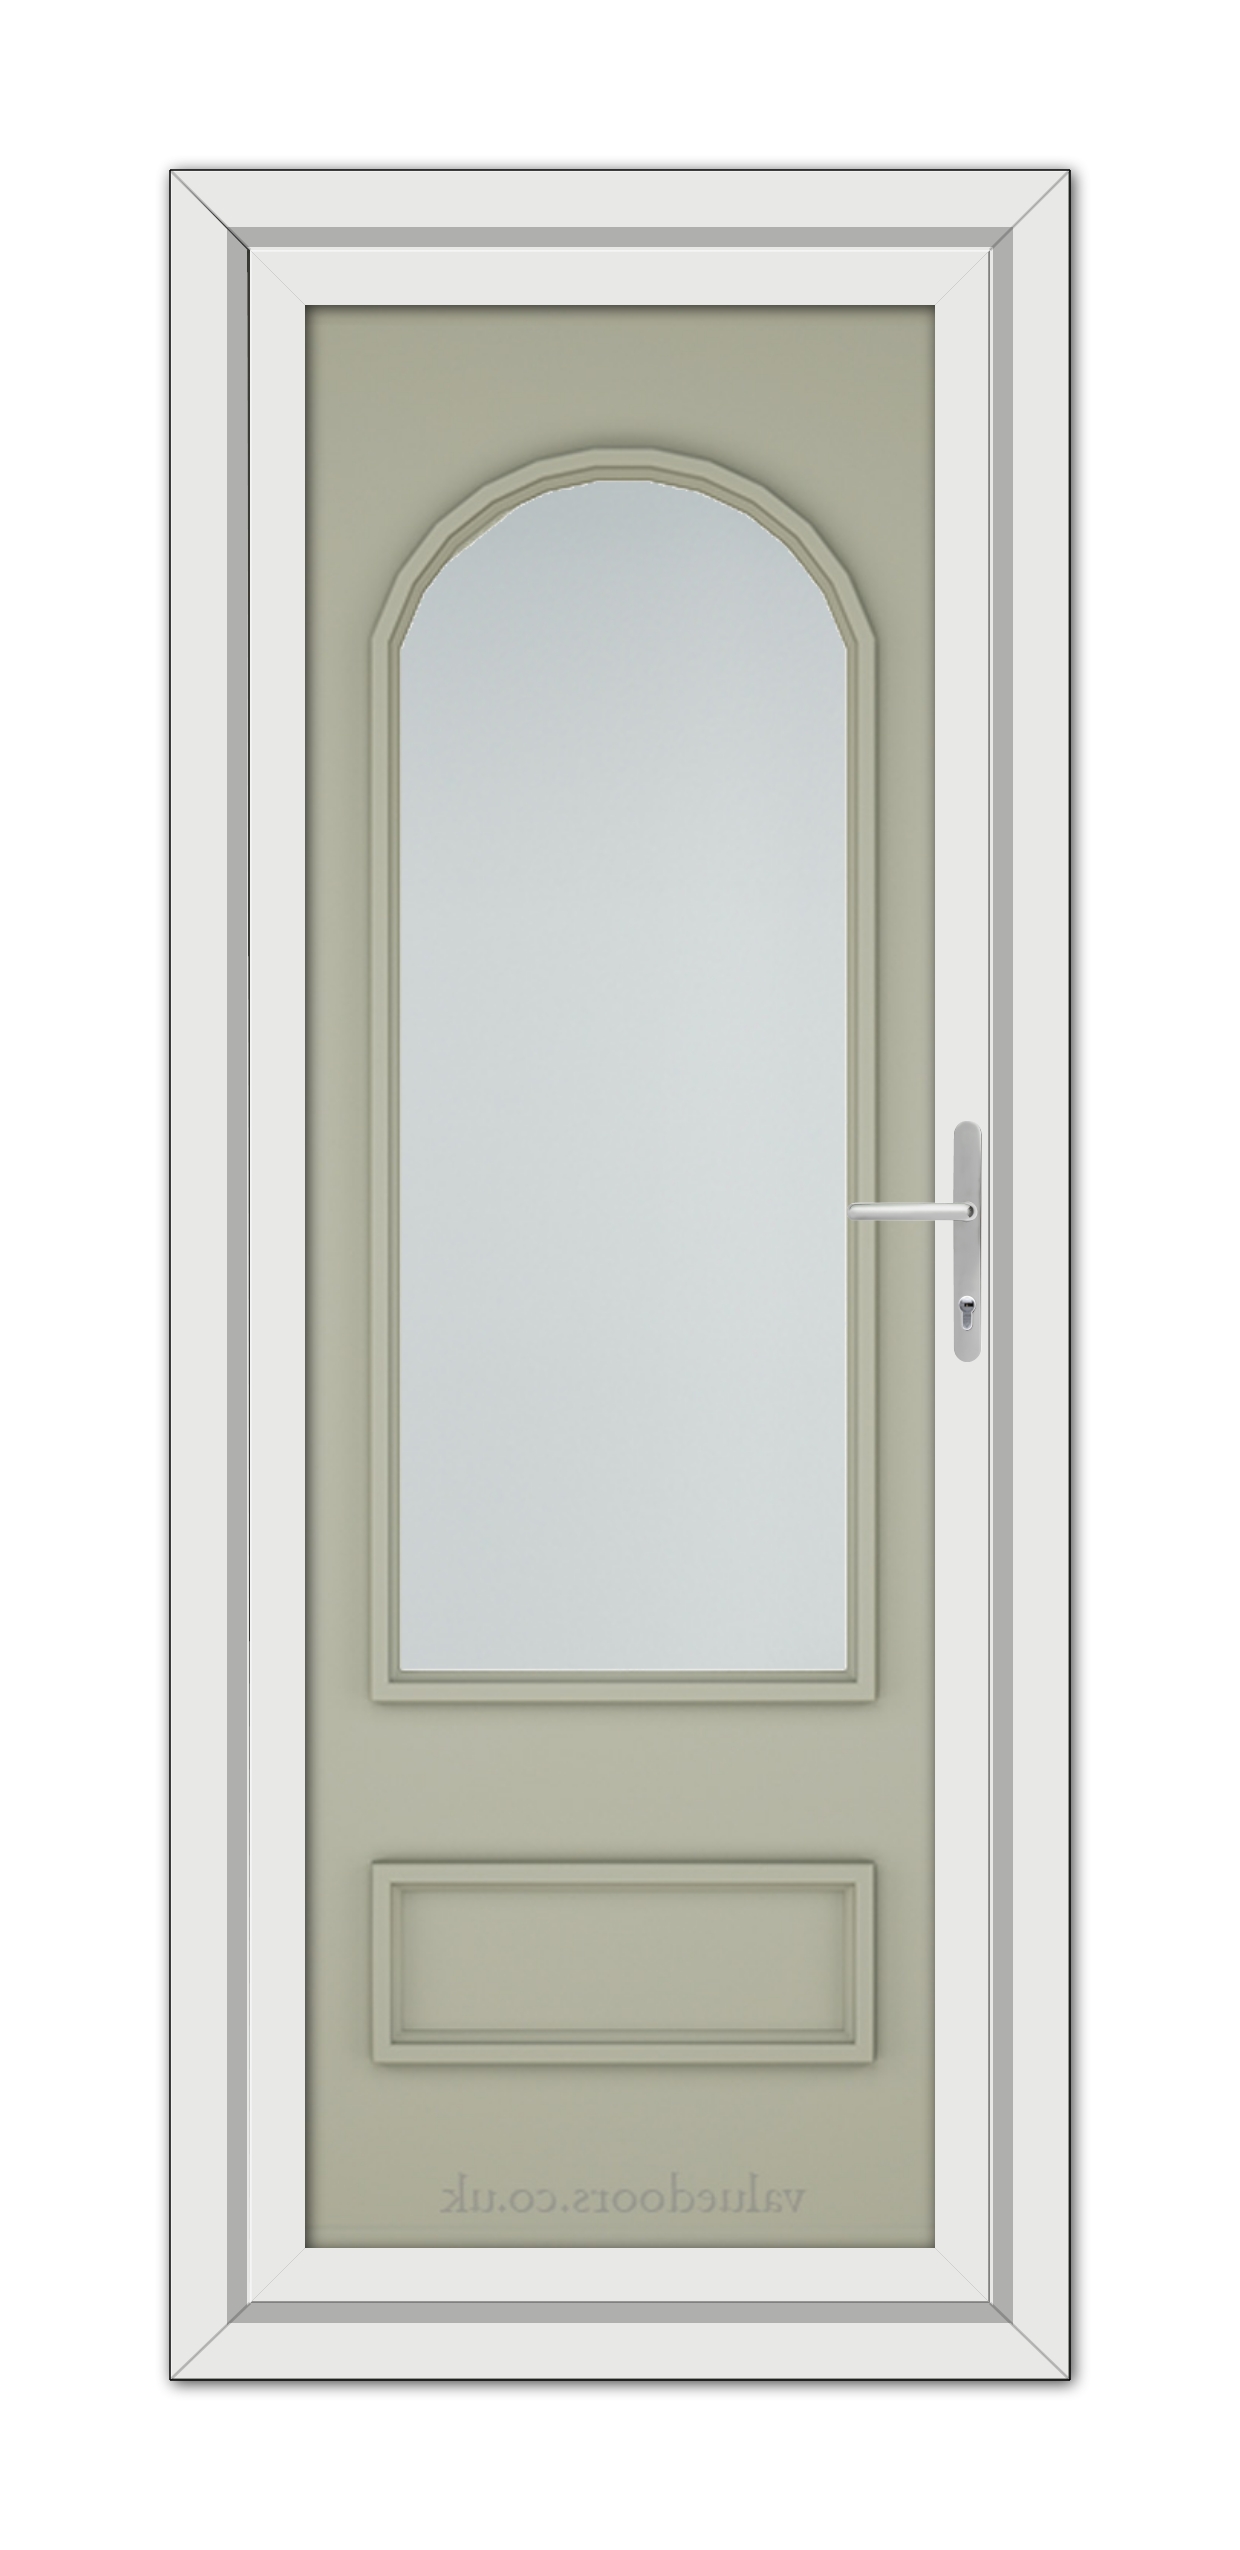 A modern, Agate Grey Canterbury uPVC Door with an arched window at the top, a white handle, and a white frame.